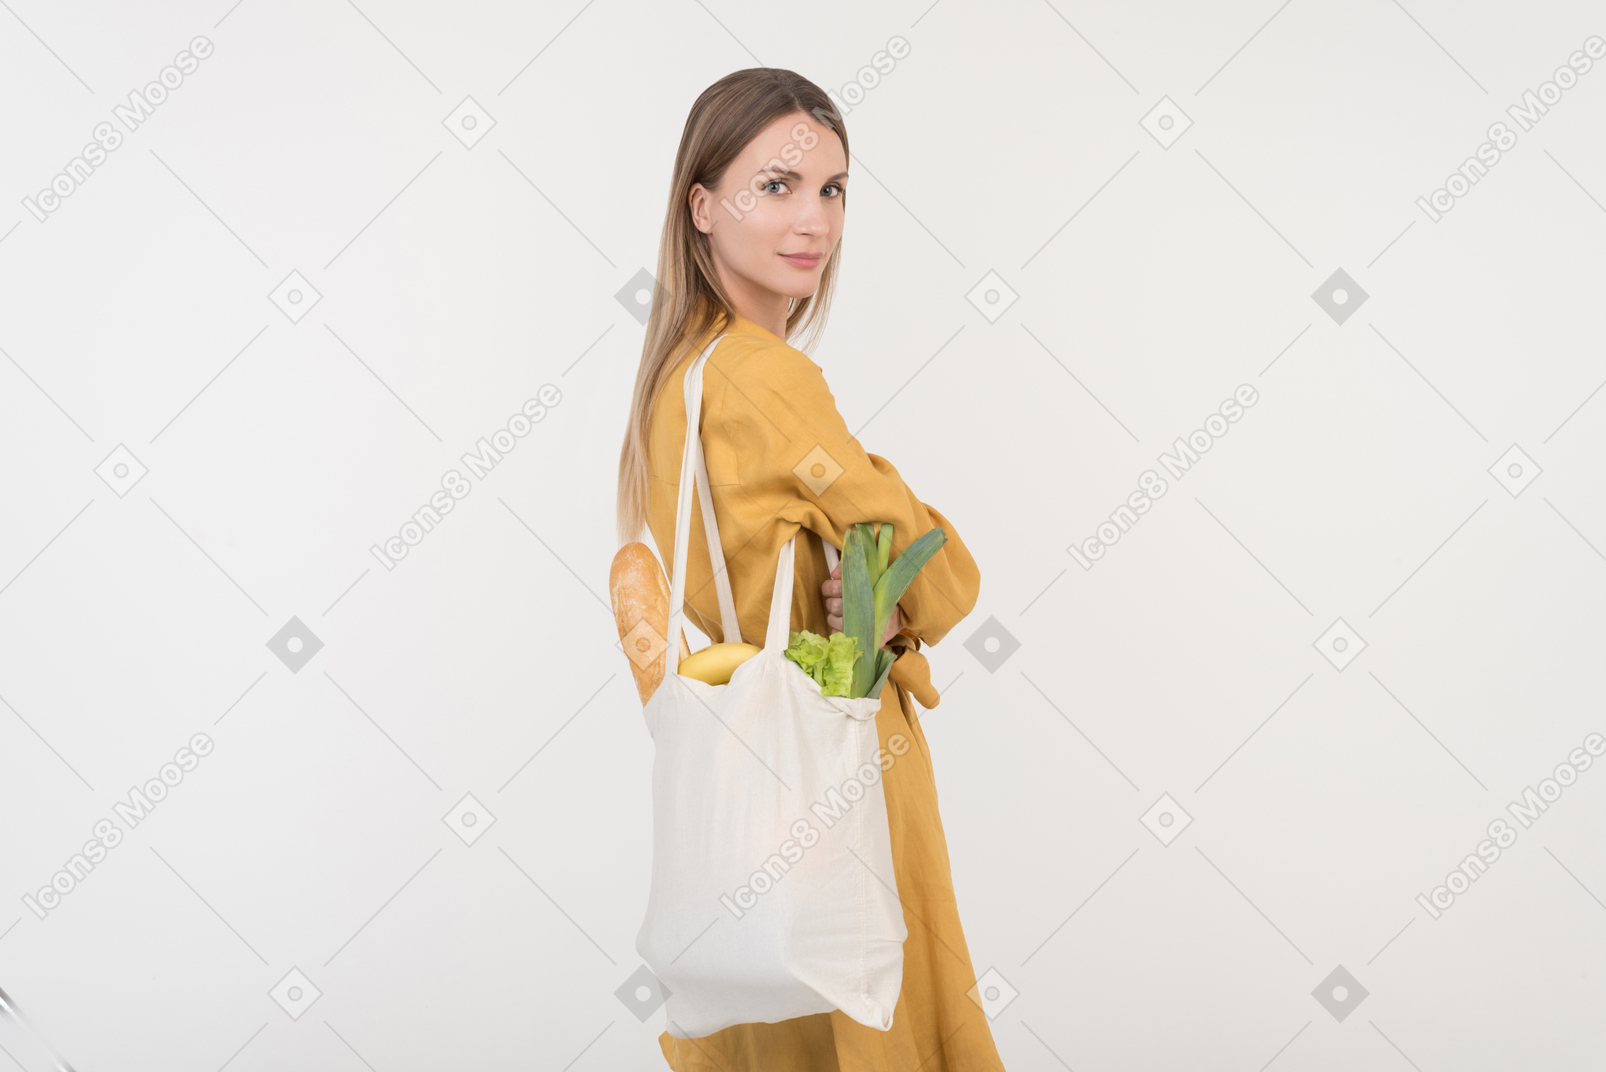 Young woman holding reusable shopping bag with vegetables